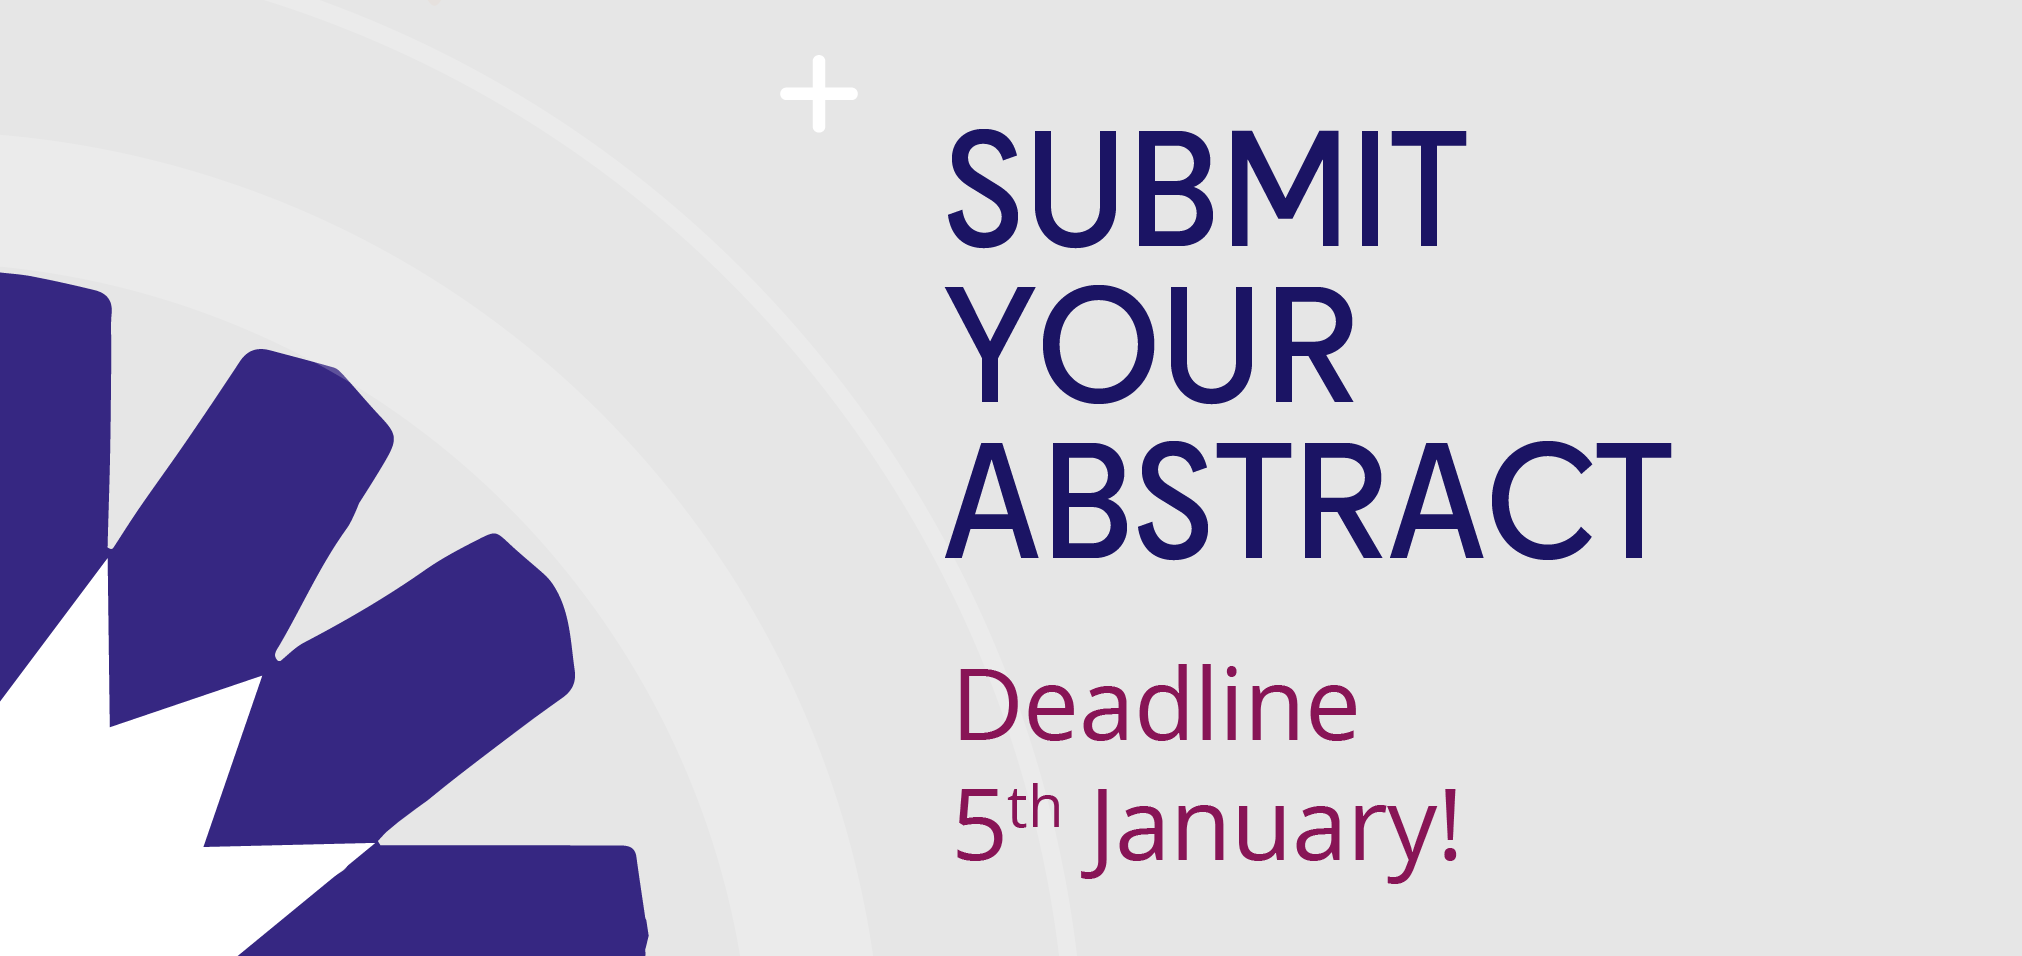 Submit your abstract deadline 5 January